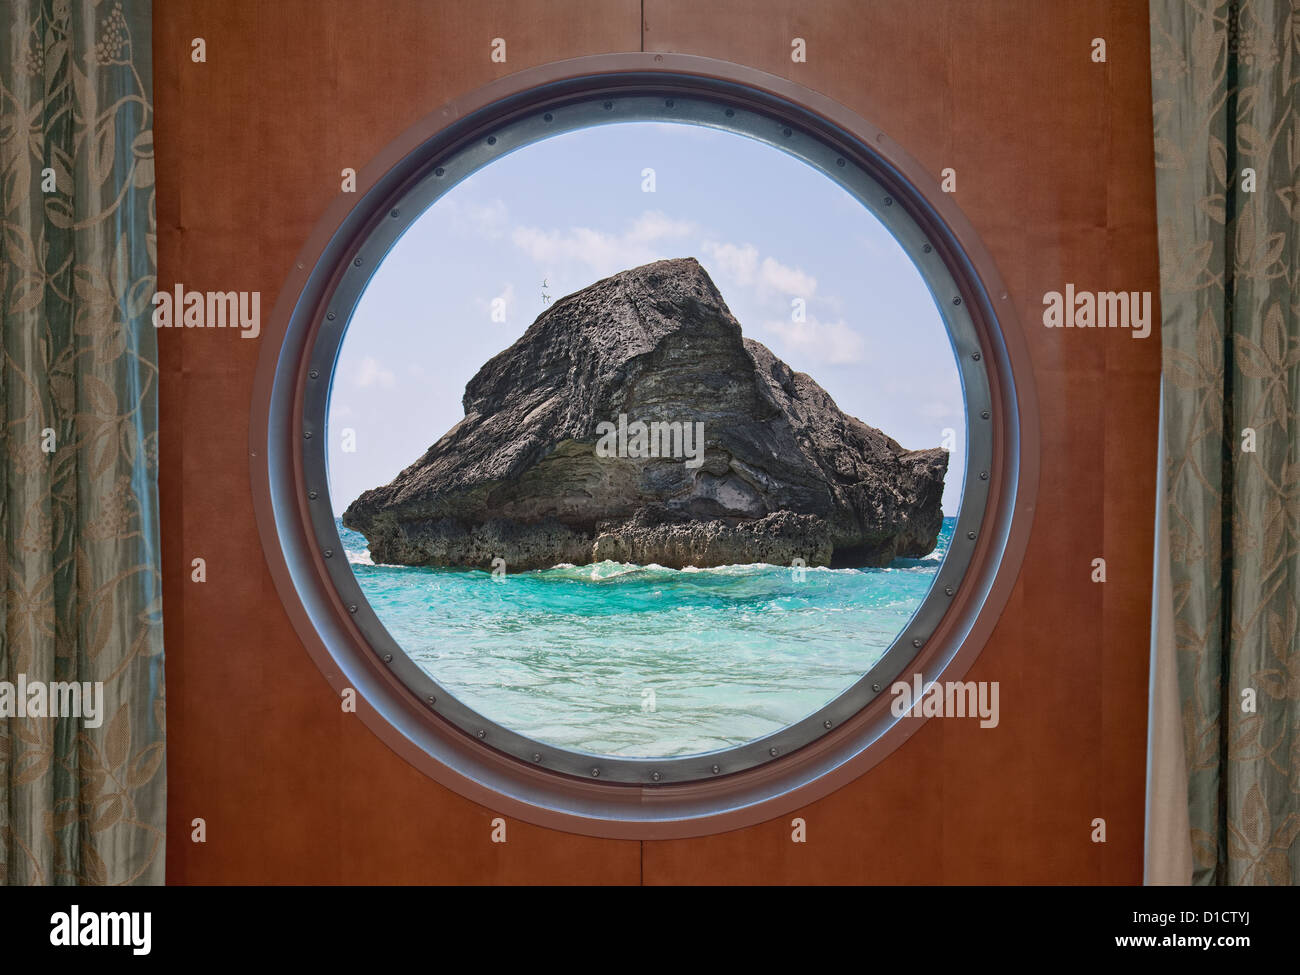 A large rock in the Atlantic ocean in the coastal waters of Bermuda seen through the porthole of a cruise ship. Stock Photo